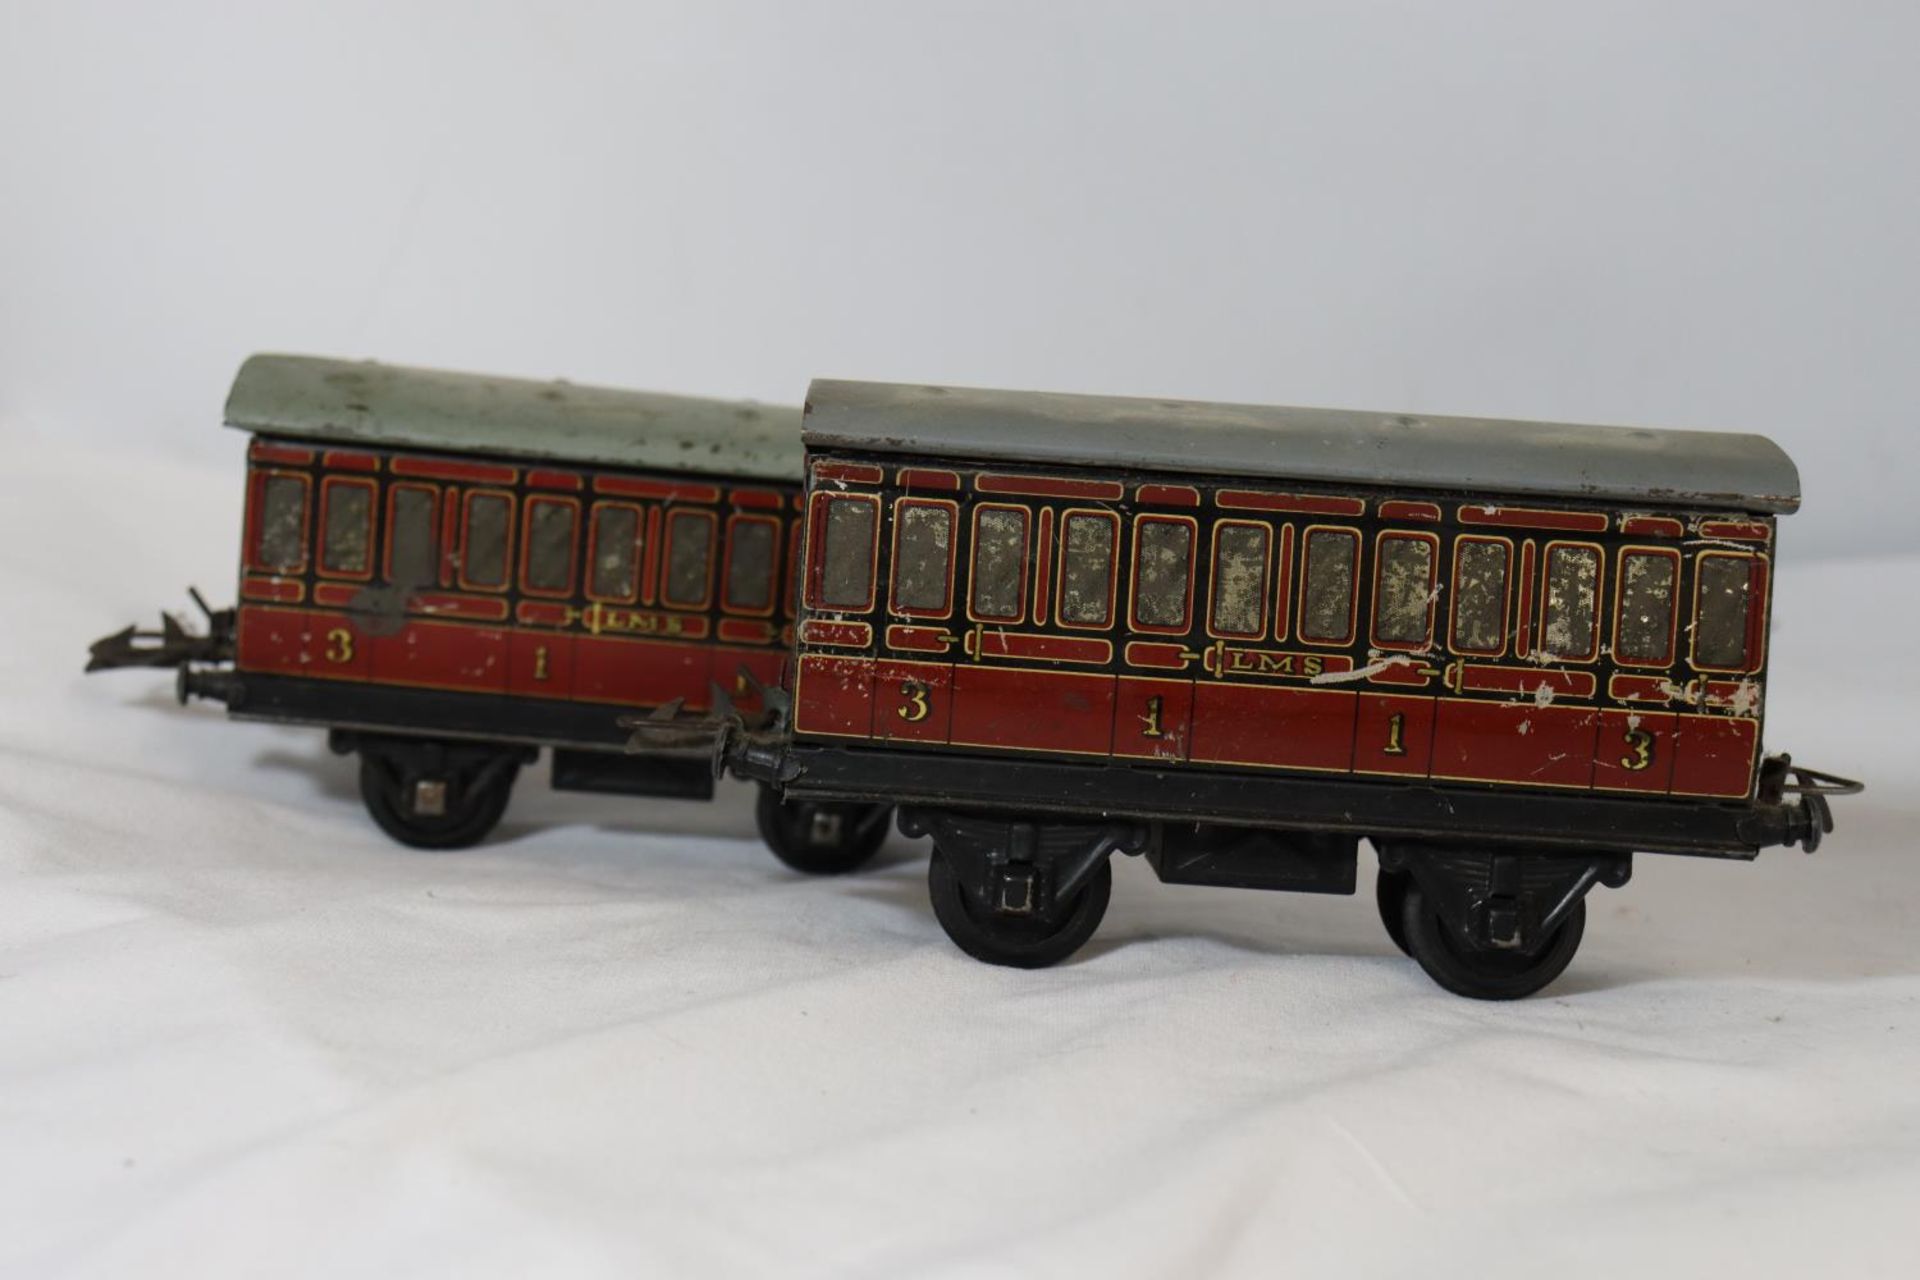 TWO HORNBY .30 GAUGE METAL RAILWAY CARRIAGES LENGTH 17 CM - Image 3 of 4